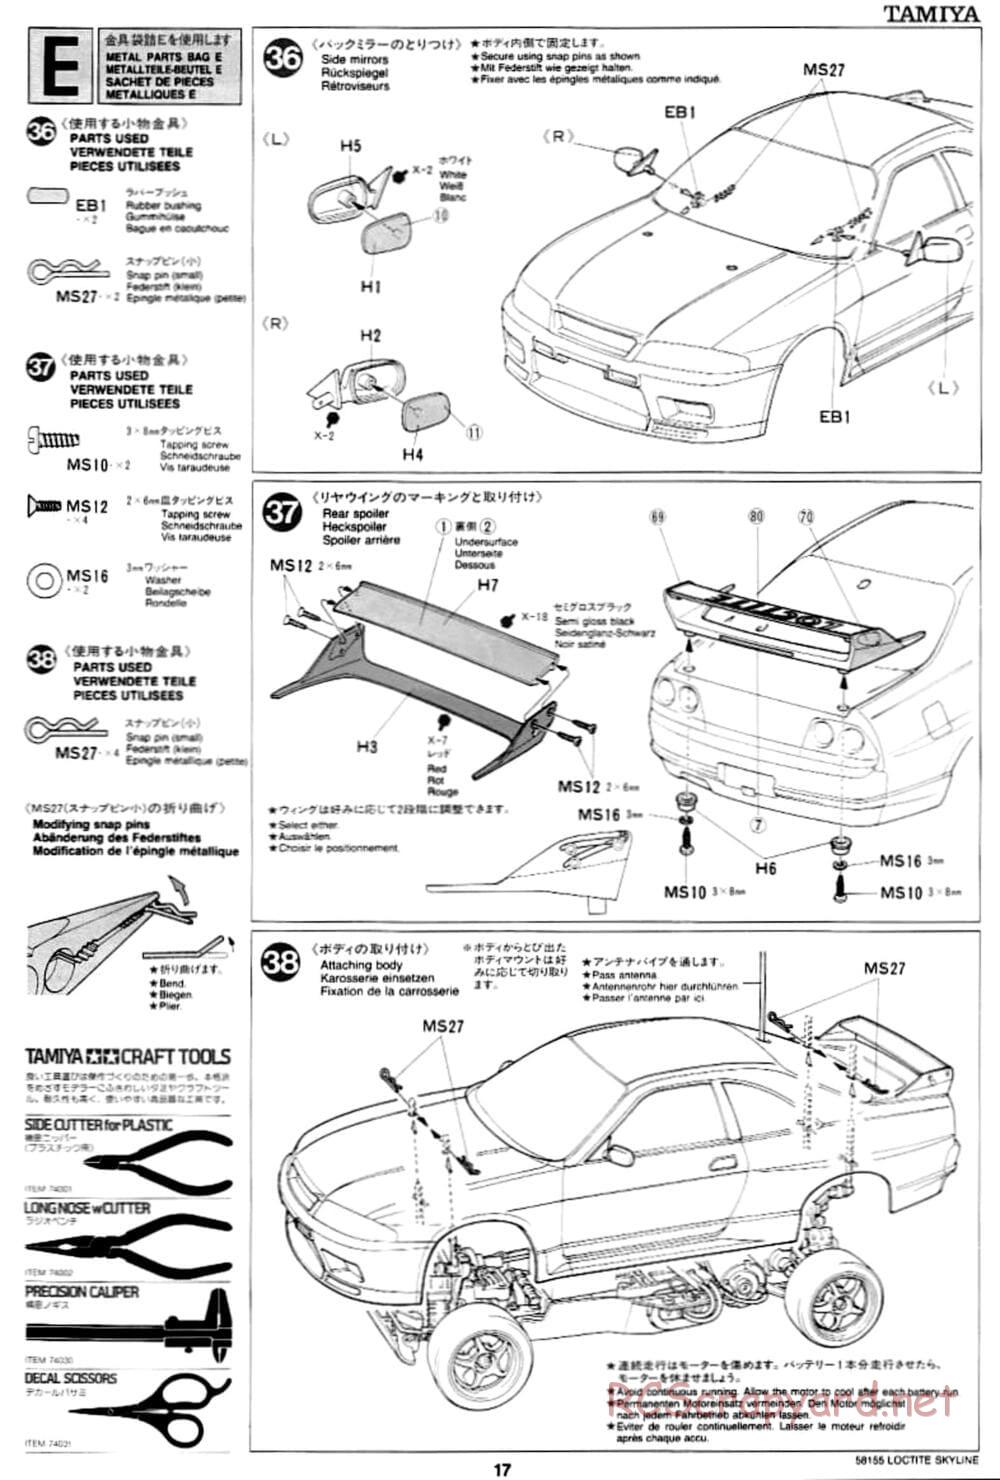 Tamiya - Loctite Nissan Skyline GT-R N1 - TA-02 Chassis - Manual - Page 18